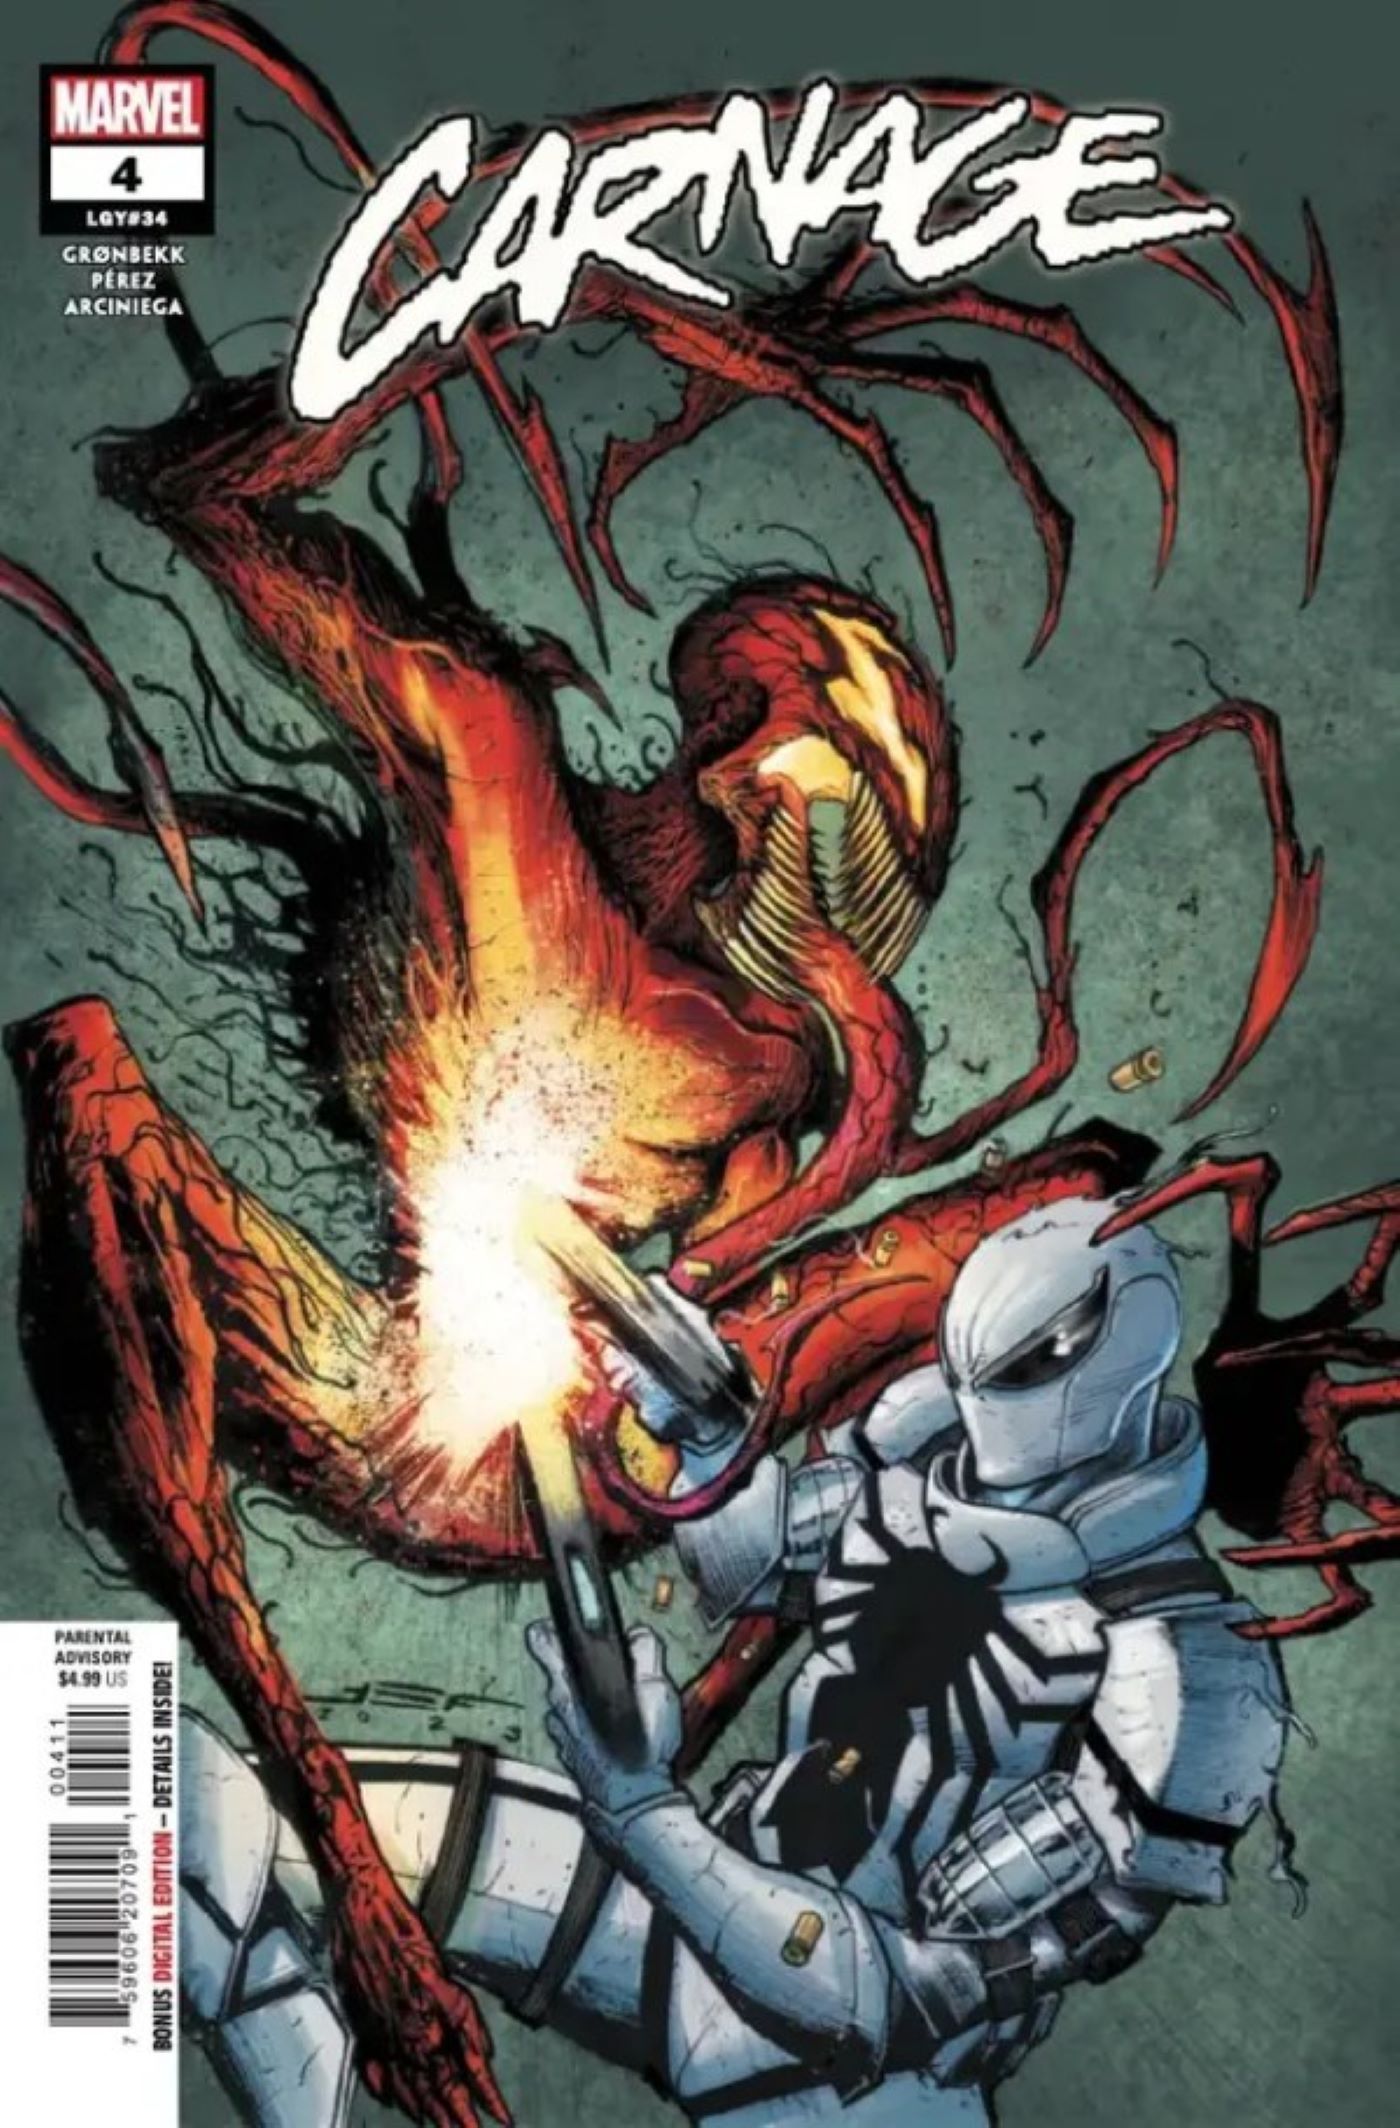 Carnage #4 featuring Agent Anti-Venom shooting Carnage